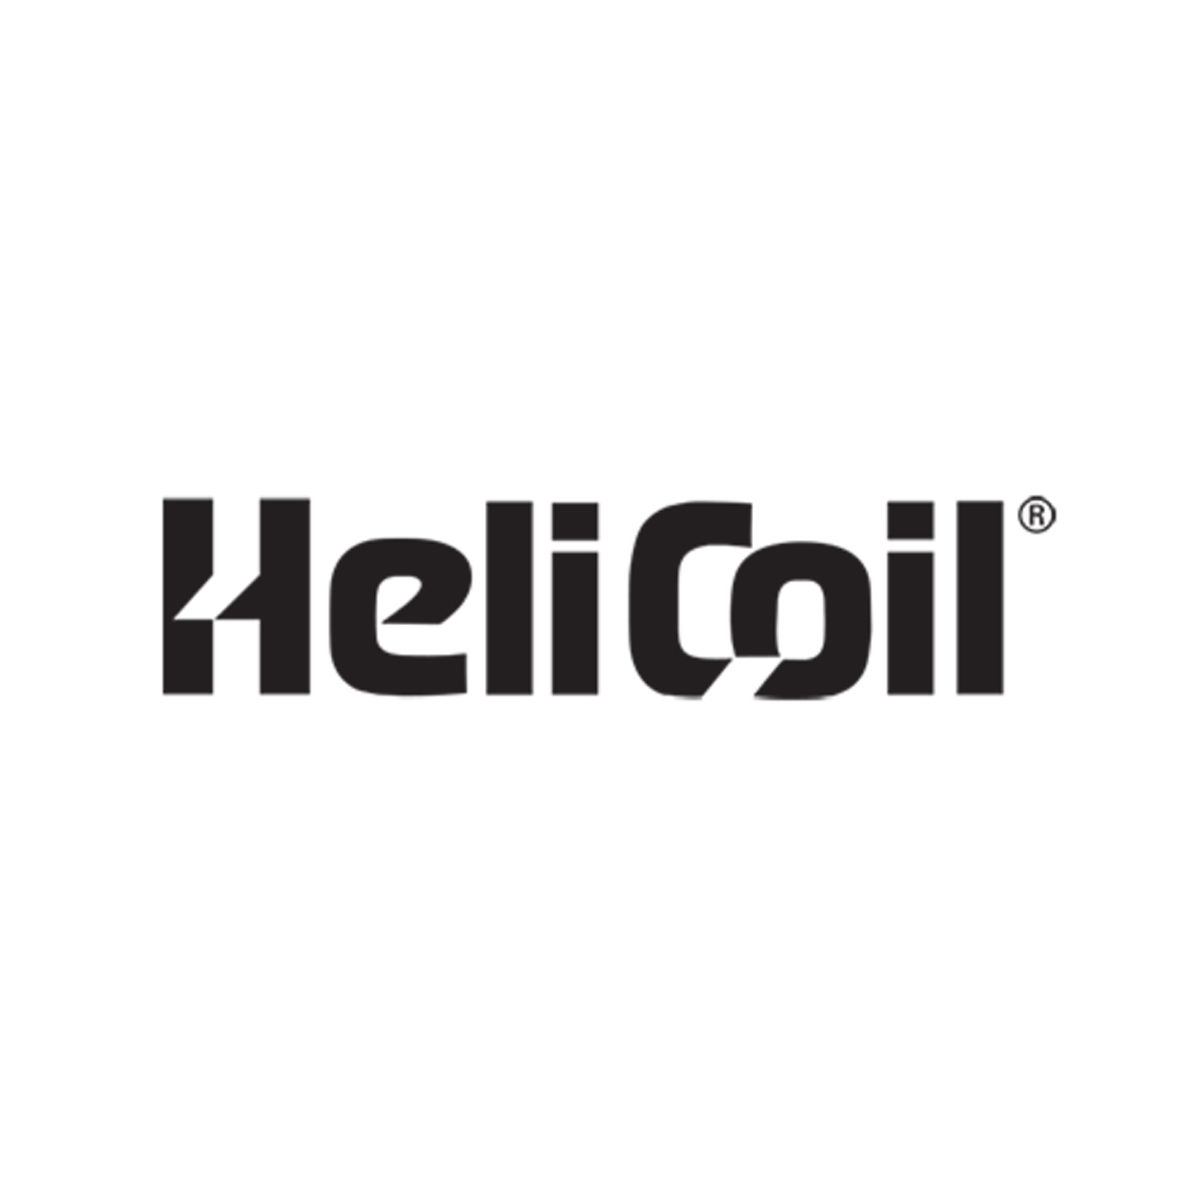 HeliCoil